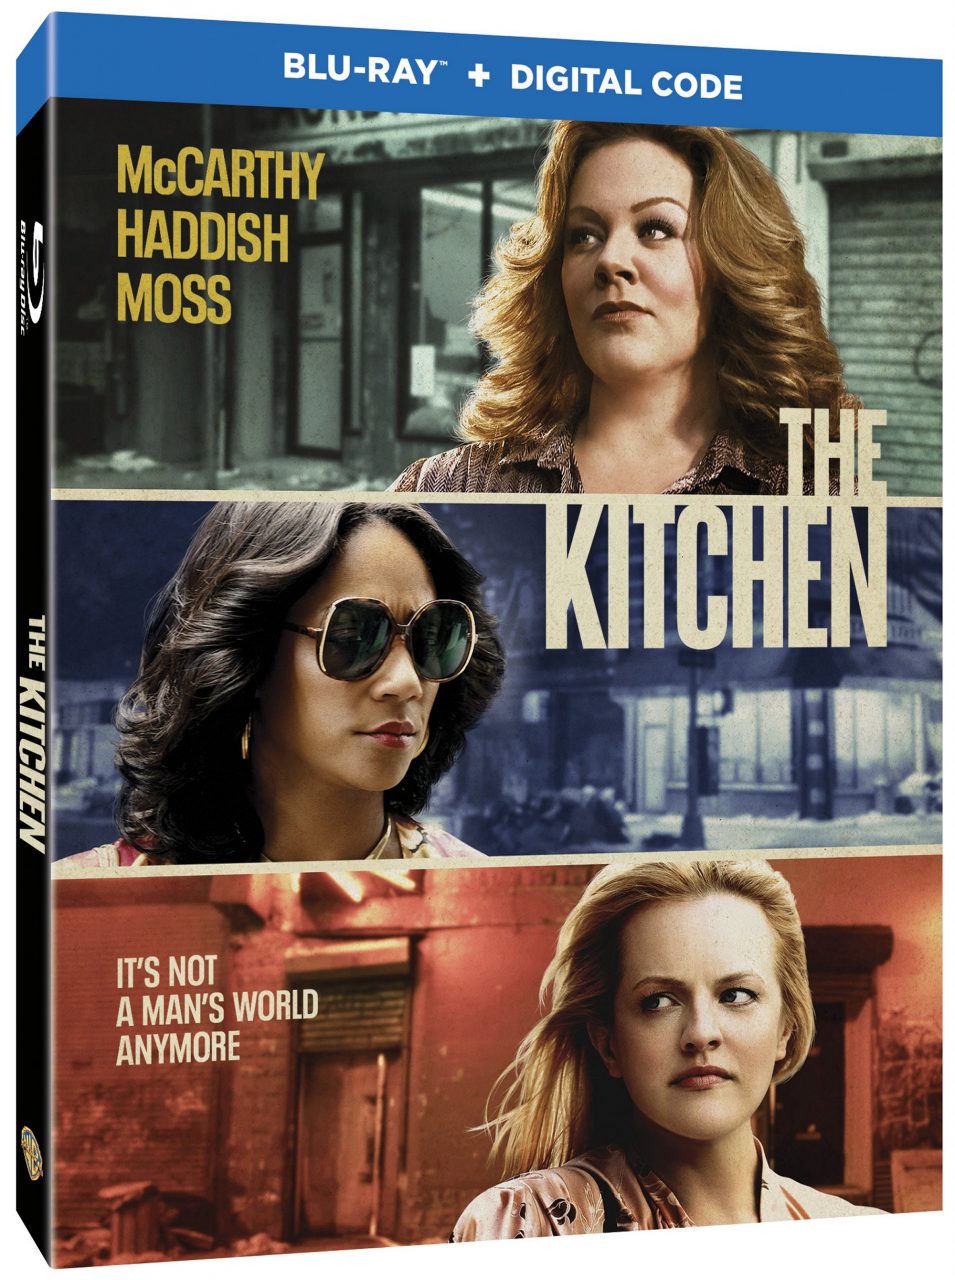 The Kitchen Blu-Ray Combo Pack cover (Warner Bros Home Entertainment/New Line Cinema)